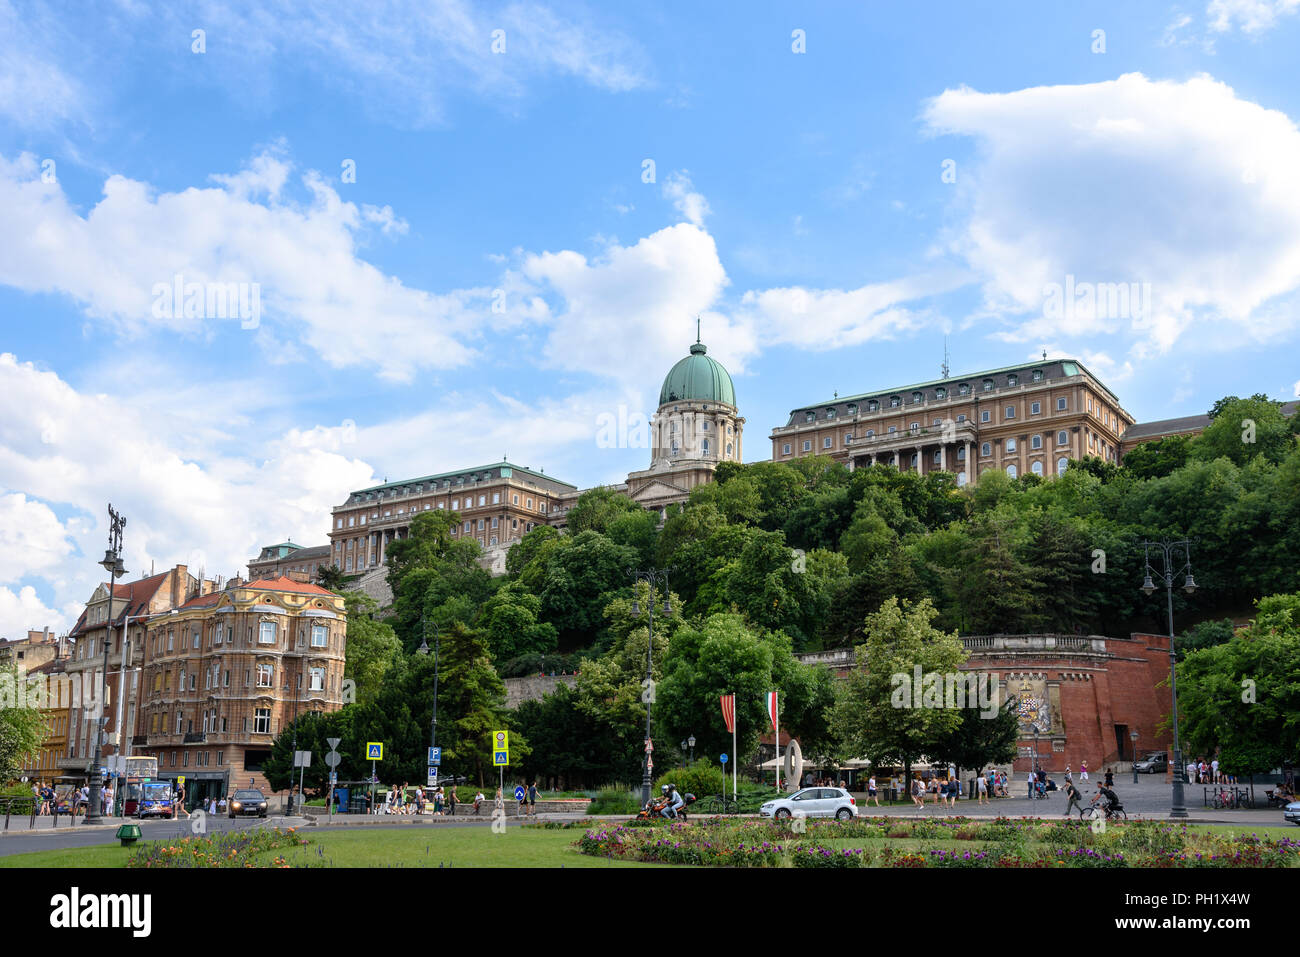 The Hungarian Royal Palace on Castle Hill above Clark Adam Square in Budapest during the day Stock Photo